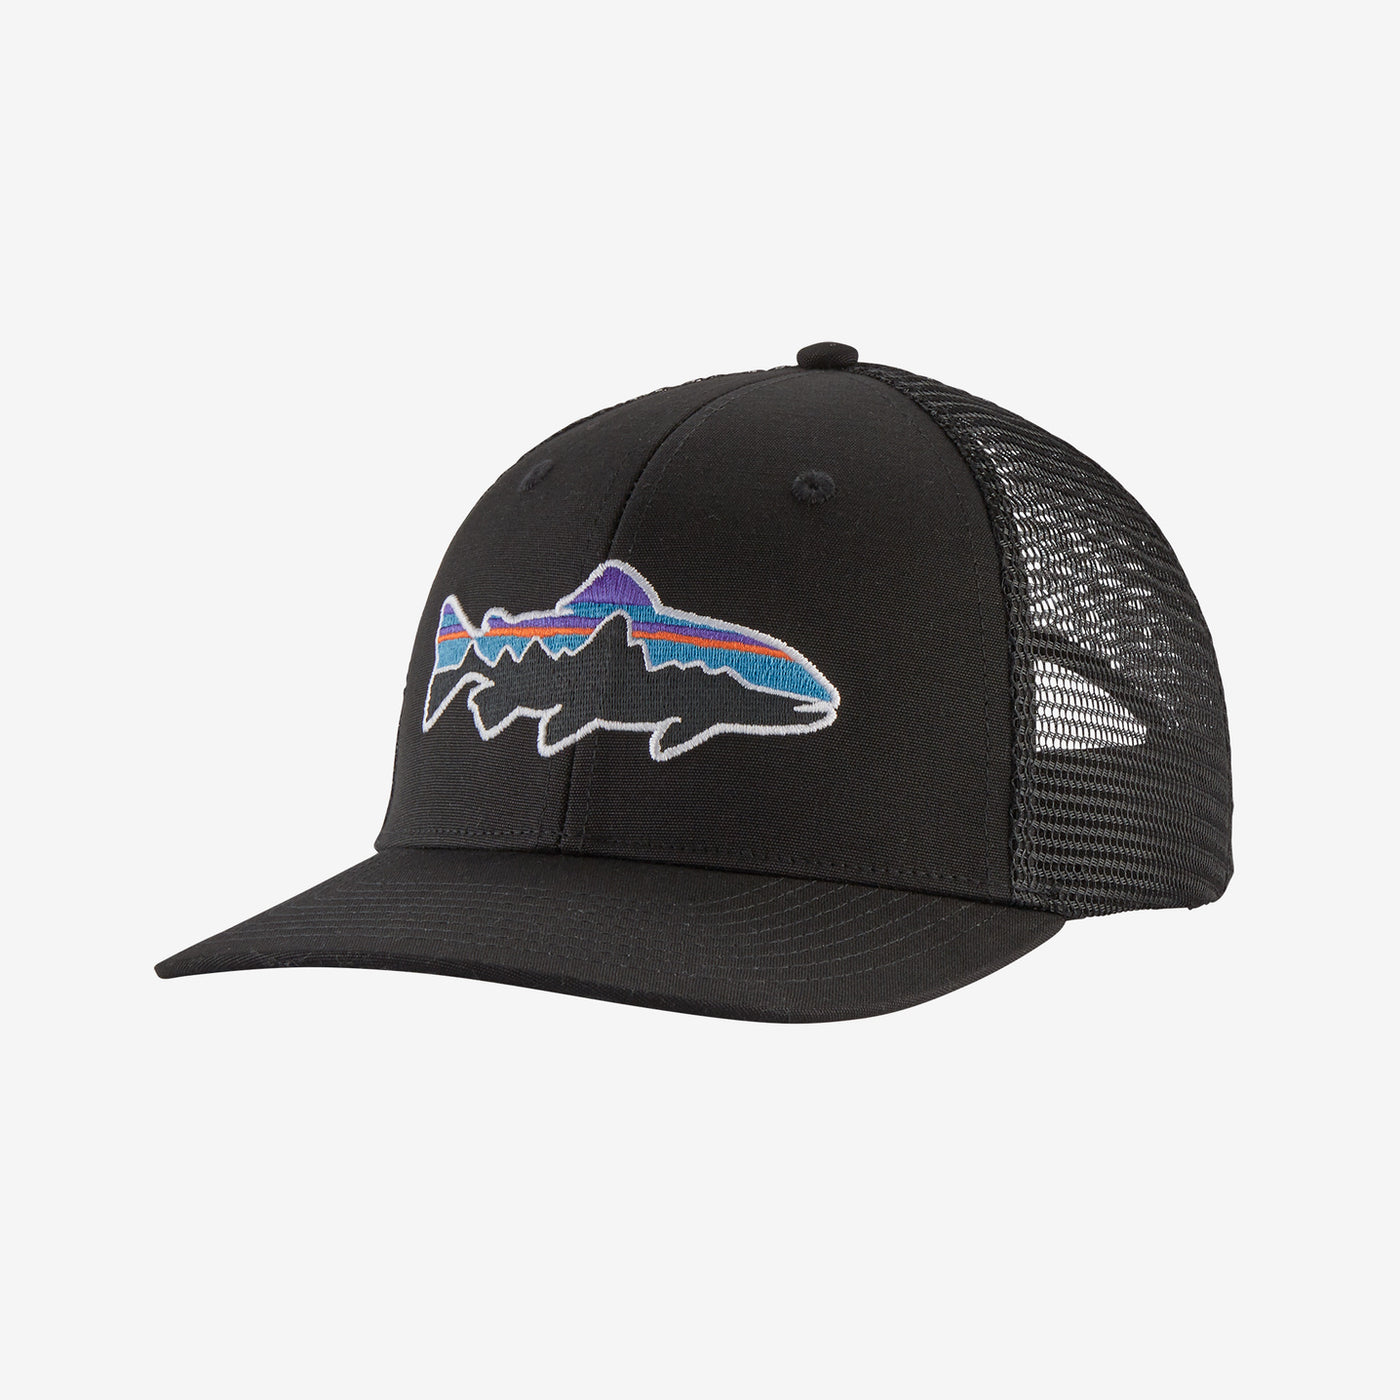 Patagonia Fitz Roy Trout Trucker Hat-Men's Accessories-Black-Kevin's Fine Outdoor Gear & Apparel